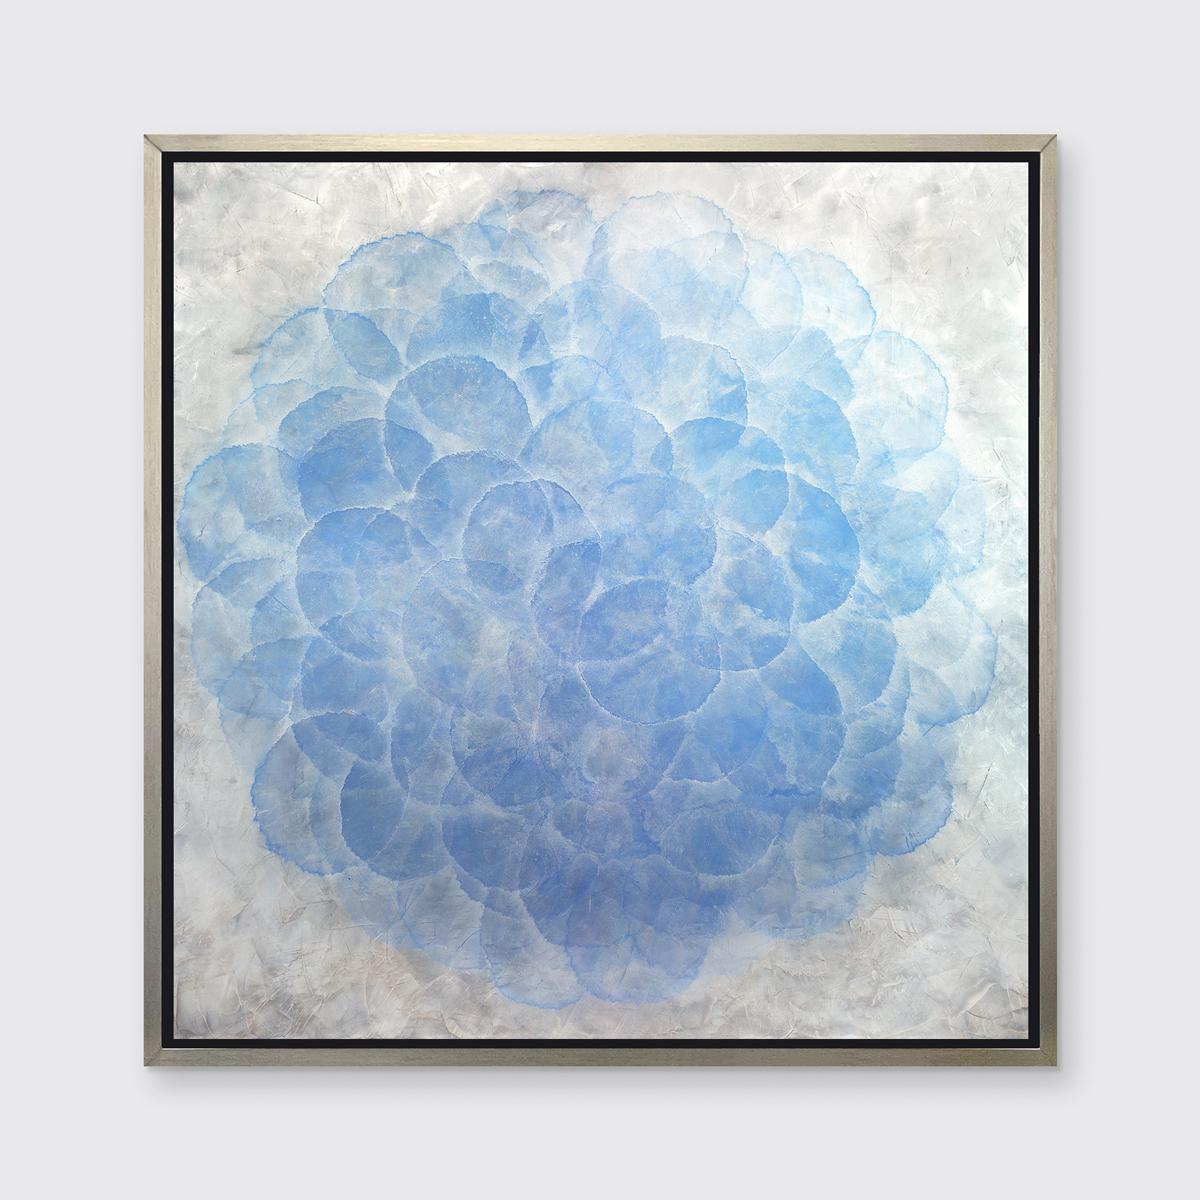 Roger Mudre Abstract Print - "Dichondra, " Framed Limited Edition Giclee Print, 30" x 30"